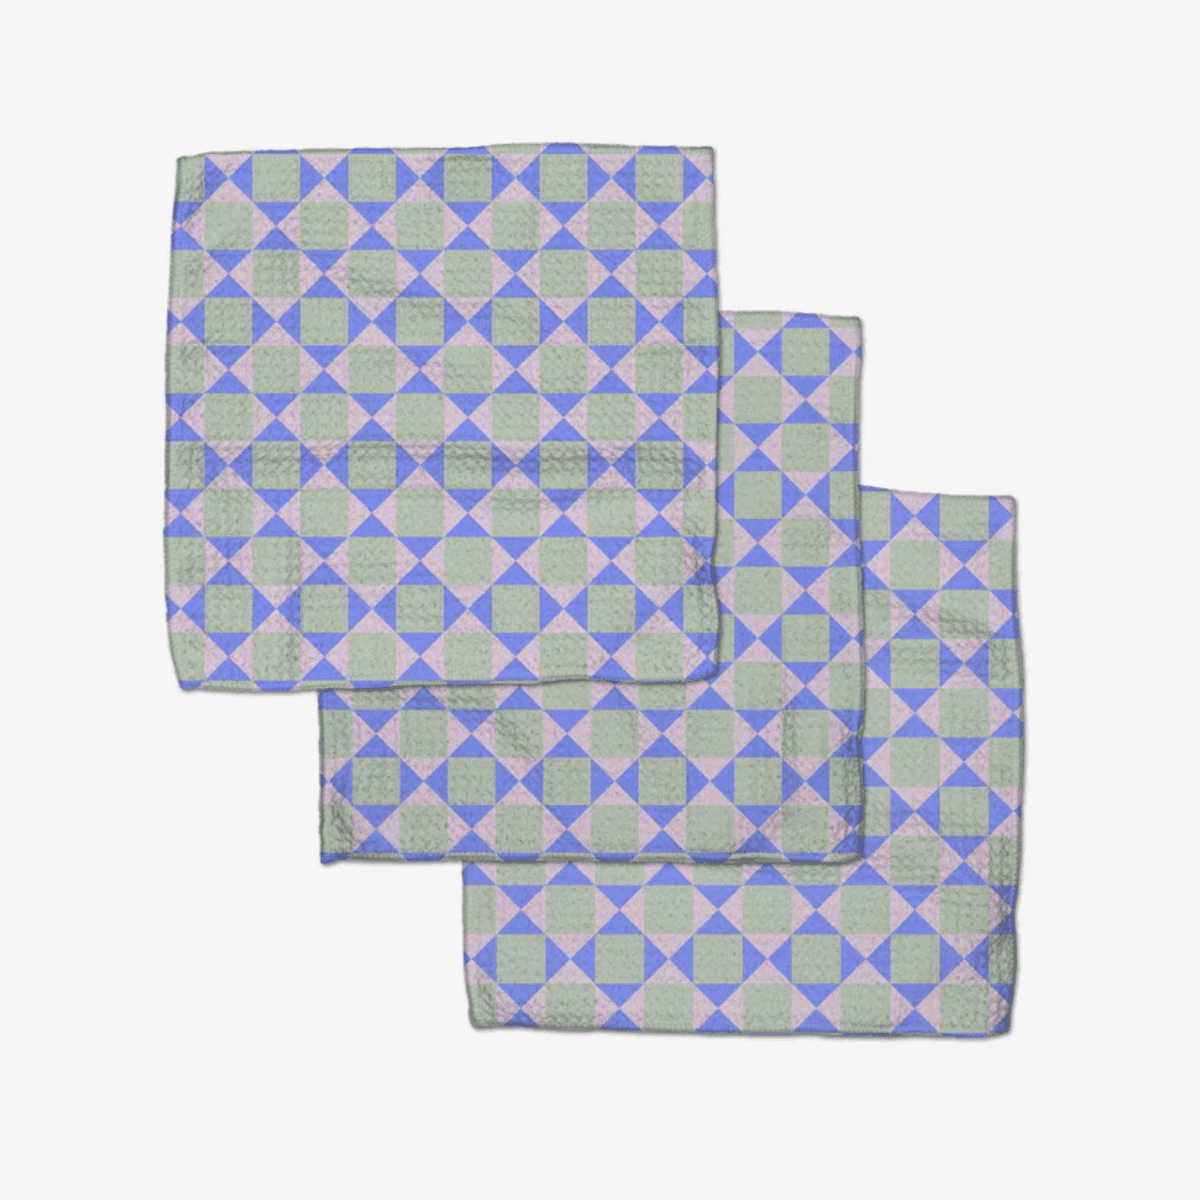 https://cdn.apartmenttherapy.info/image/upload/v1681477137/gen-workflow/product-database/Geometry-Gathering-Dishcloth-Towels.png